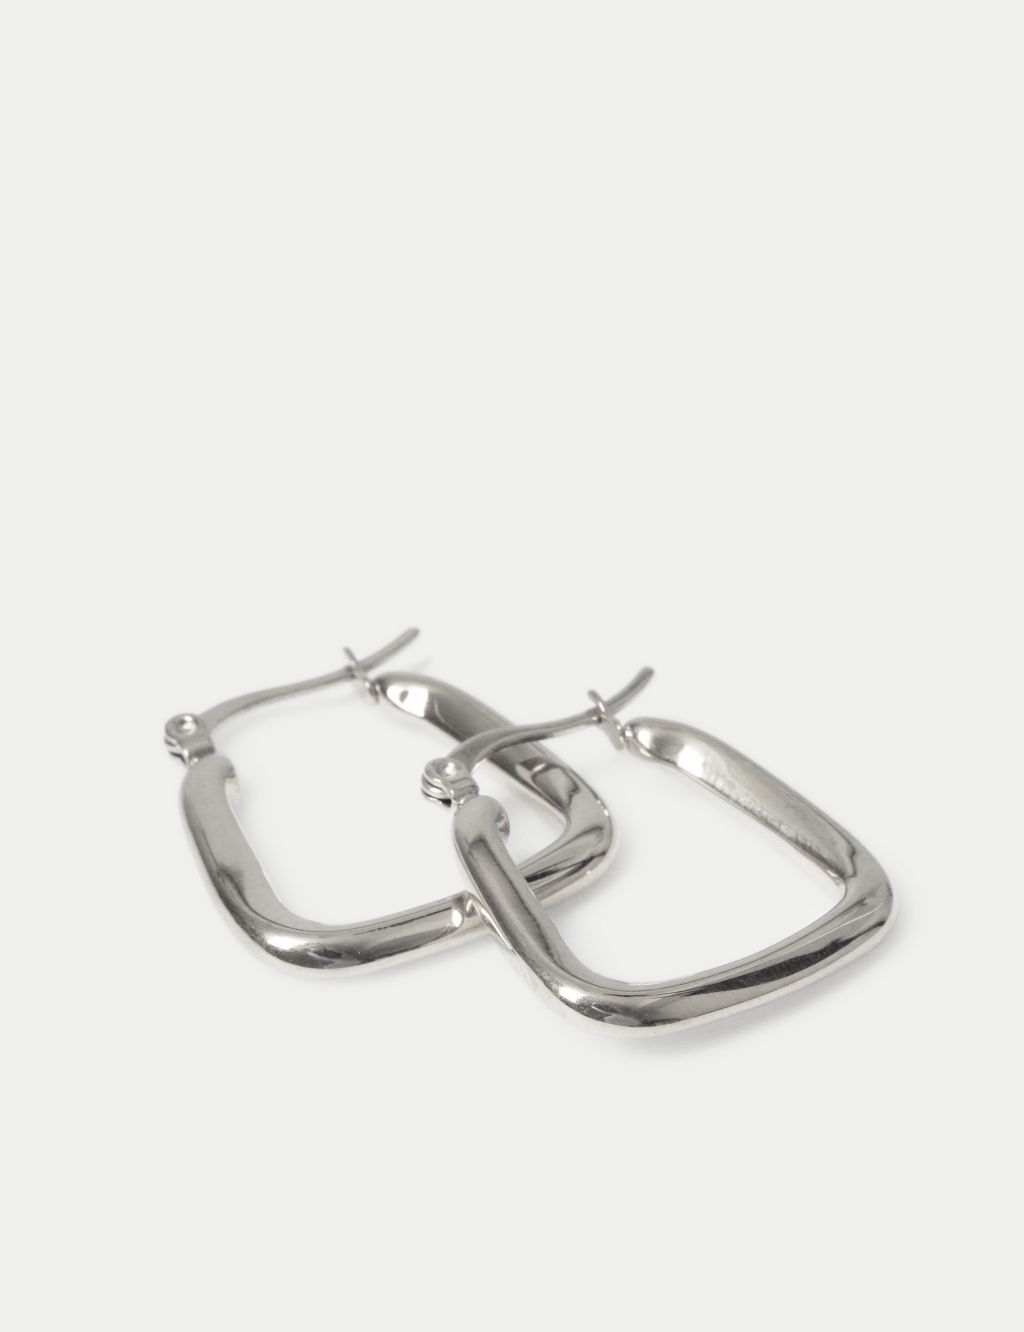 Autograph Silver Square Hoop Earrings